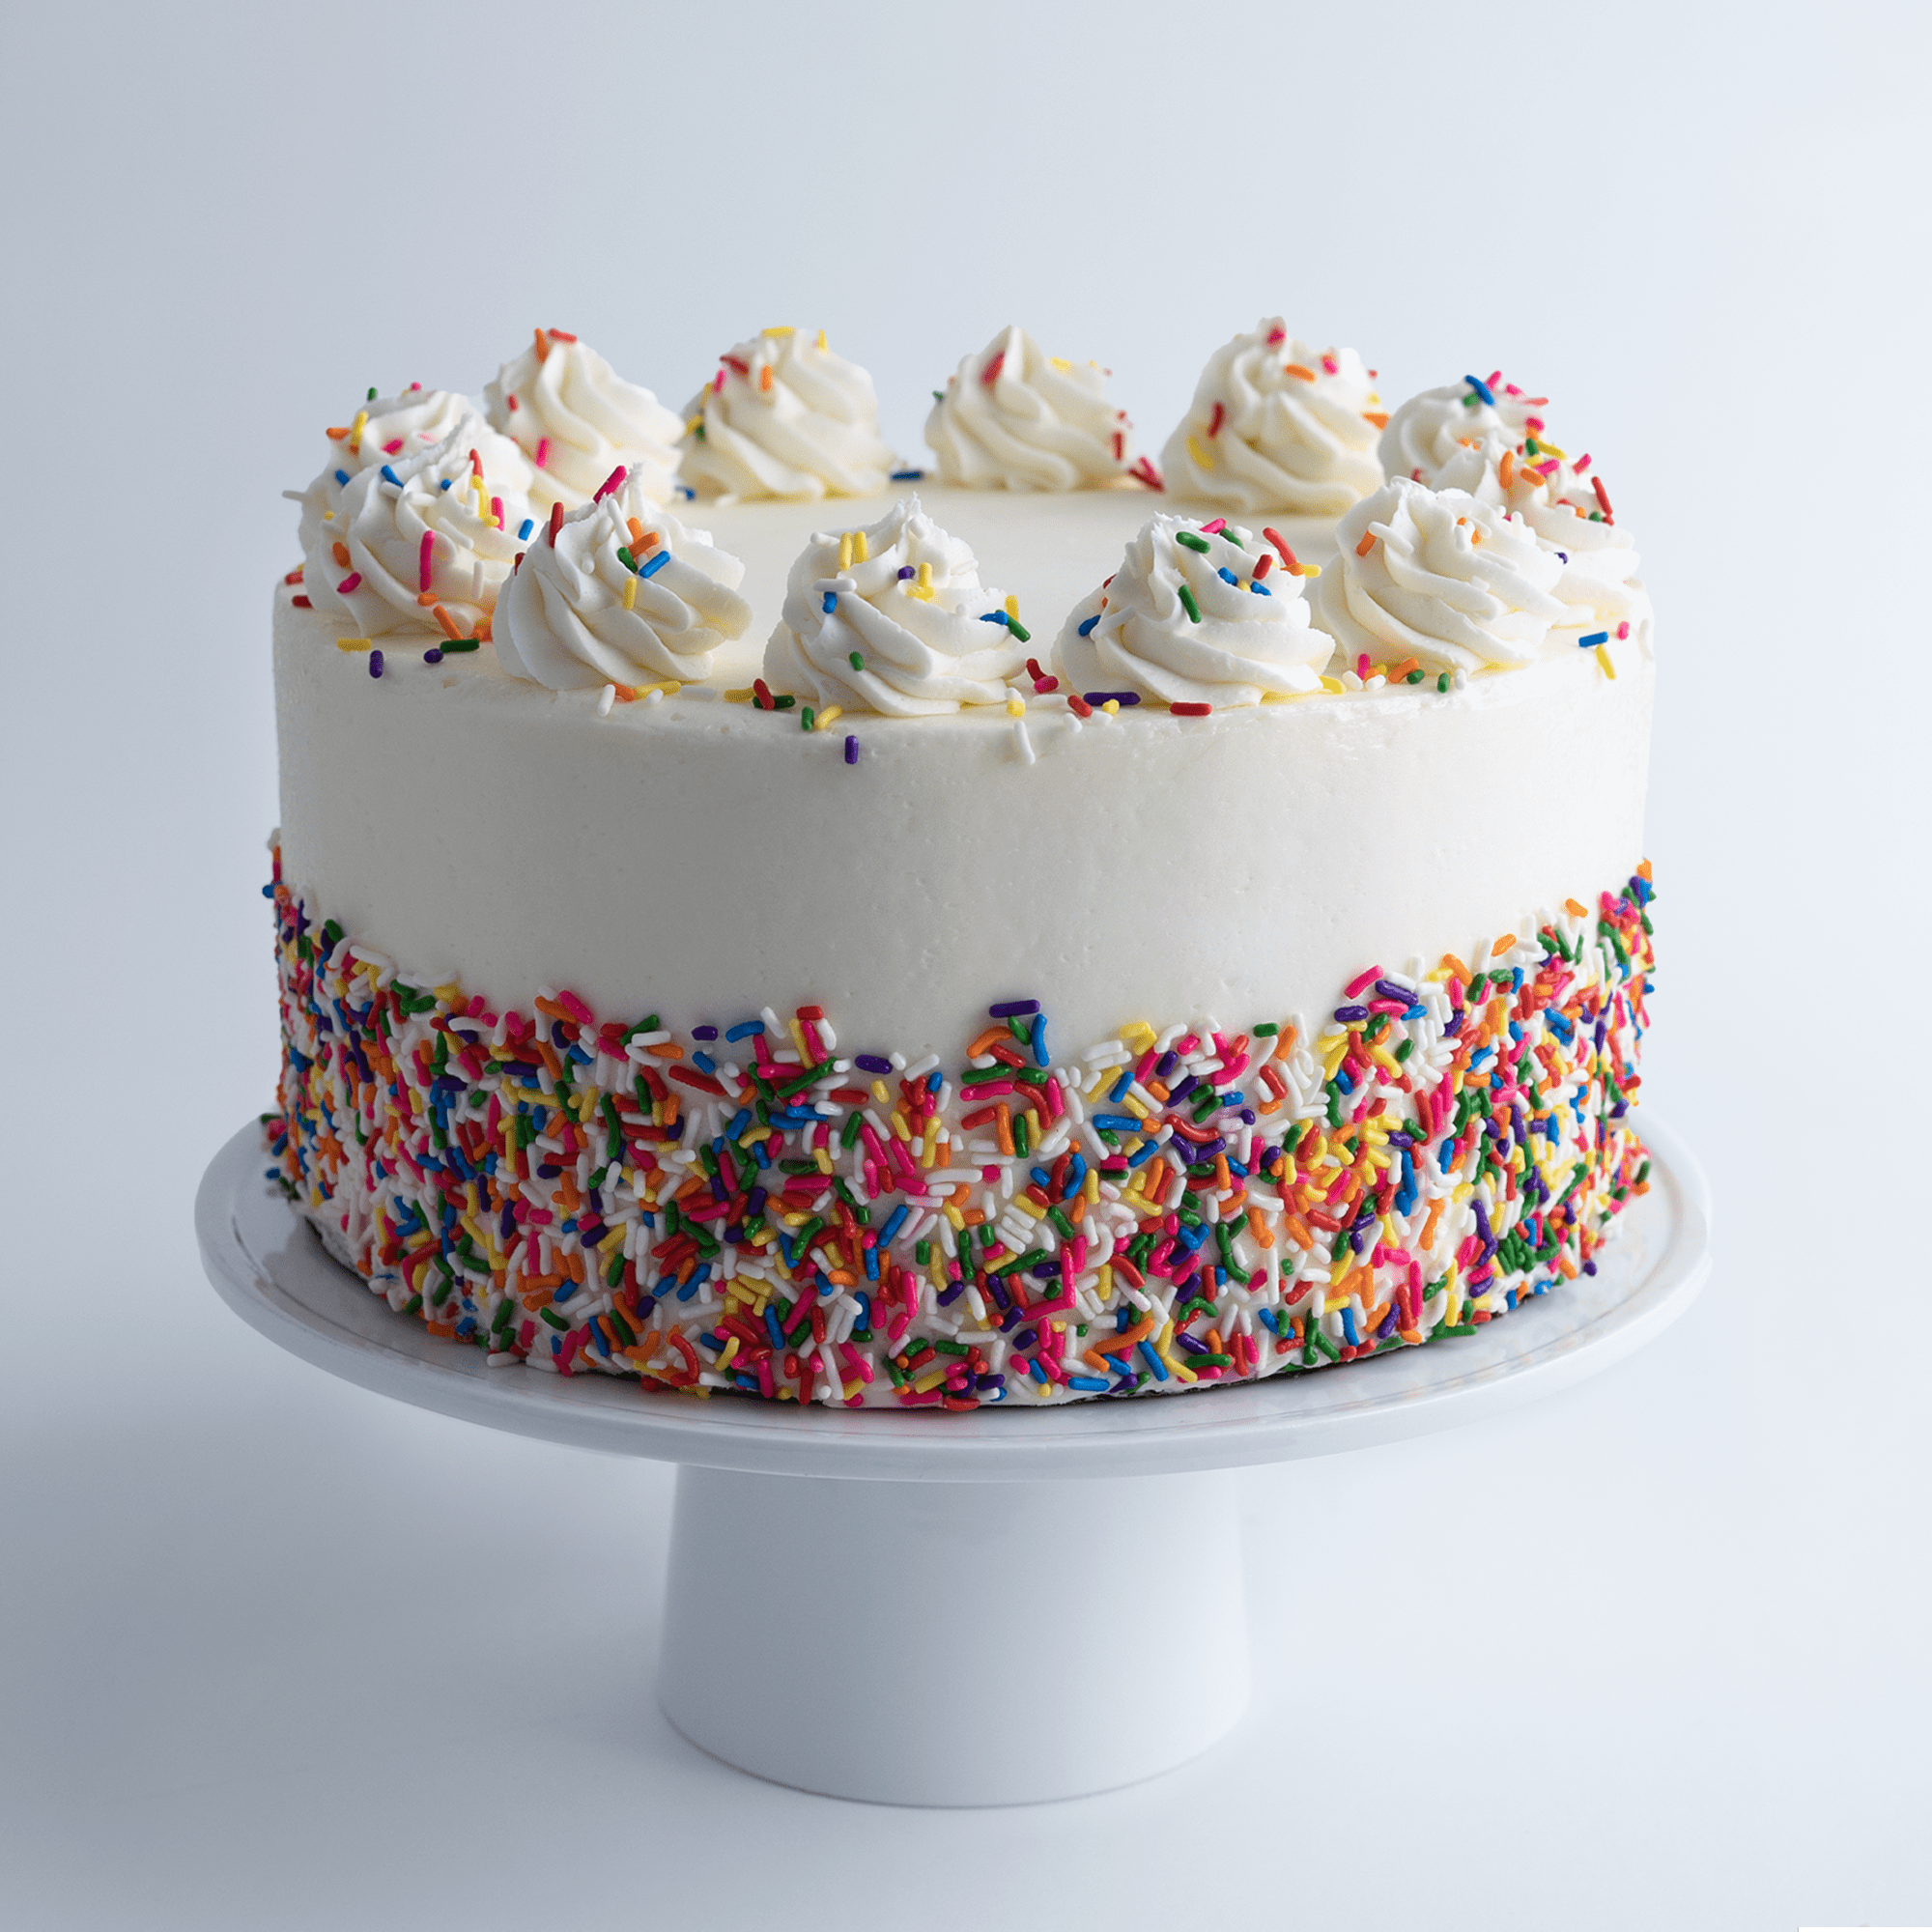 Carlo's Bakery Cake Boss Vanilla Confetti Cake, Large 10” Size - Serves 18 to 24 - Birthday Cakes and Treats for Delivery - Baked Fresh Daily, Delivered Frozen in Dry Ice - Walmart.com